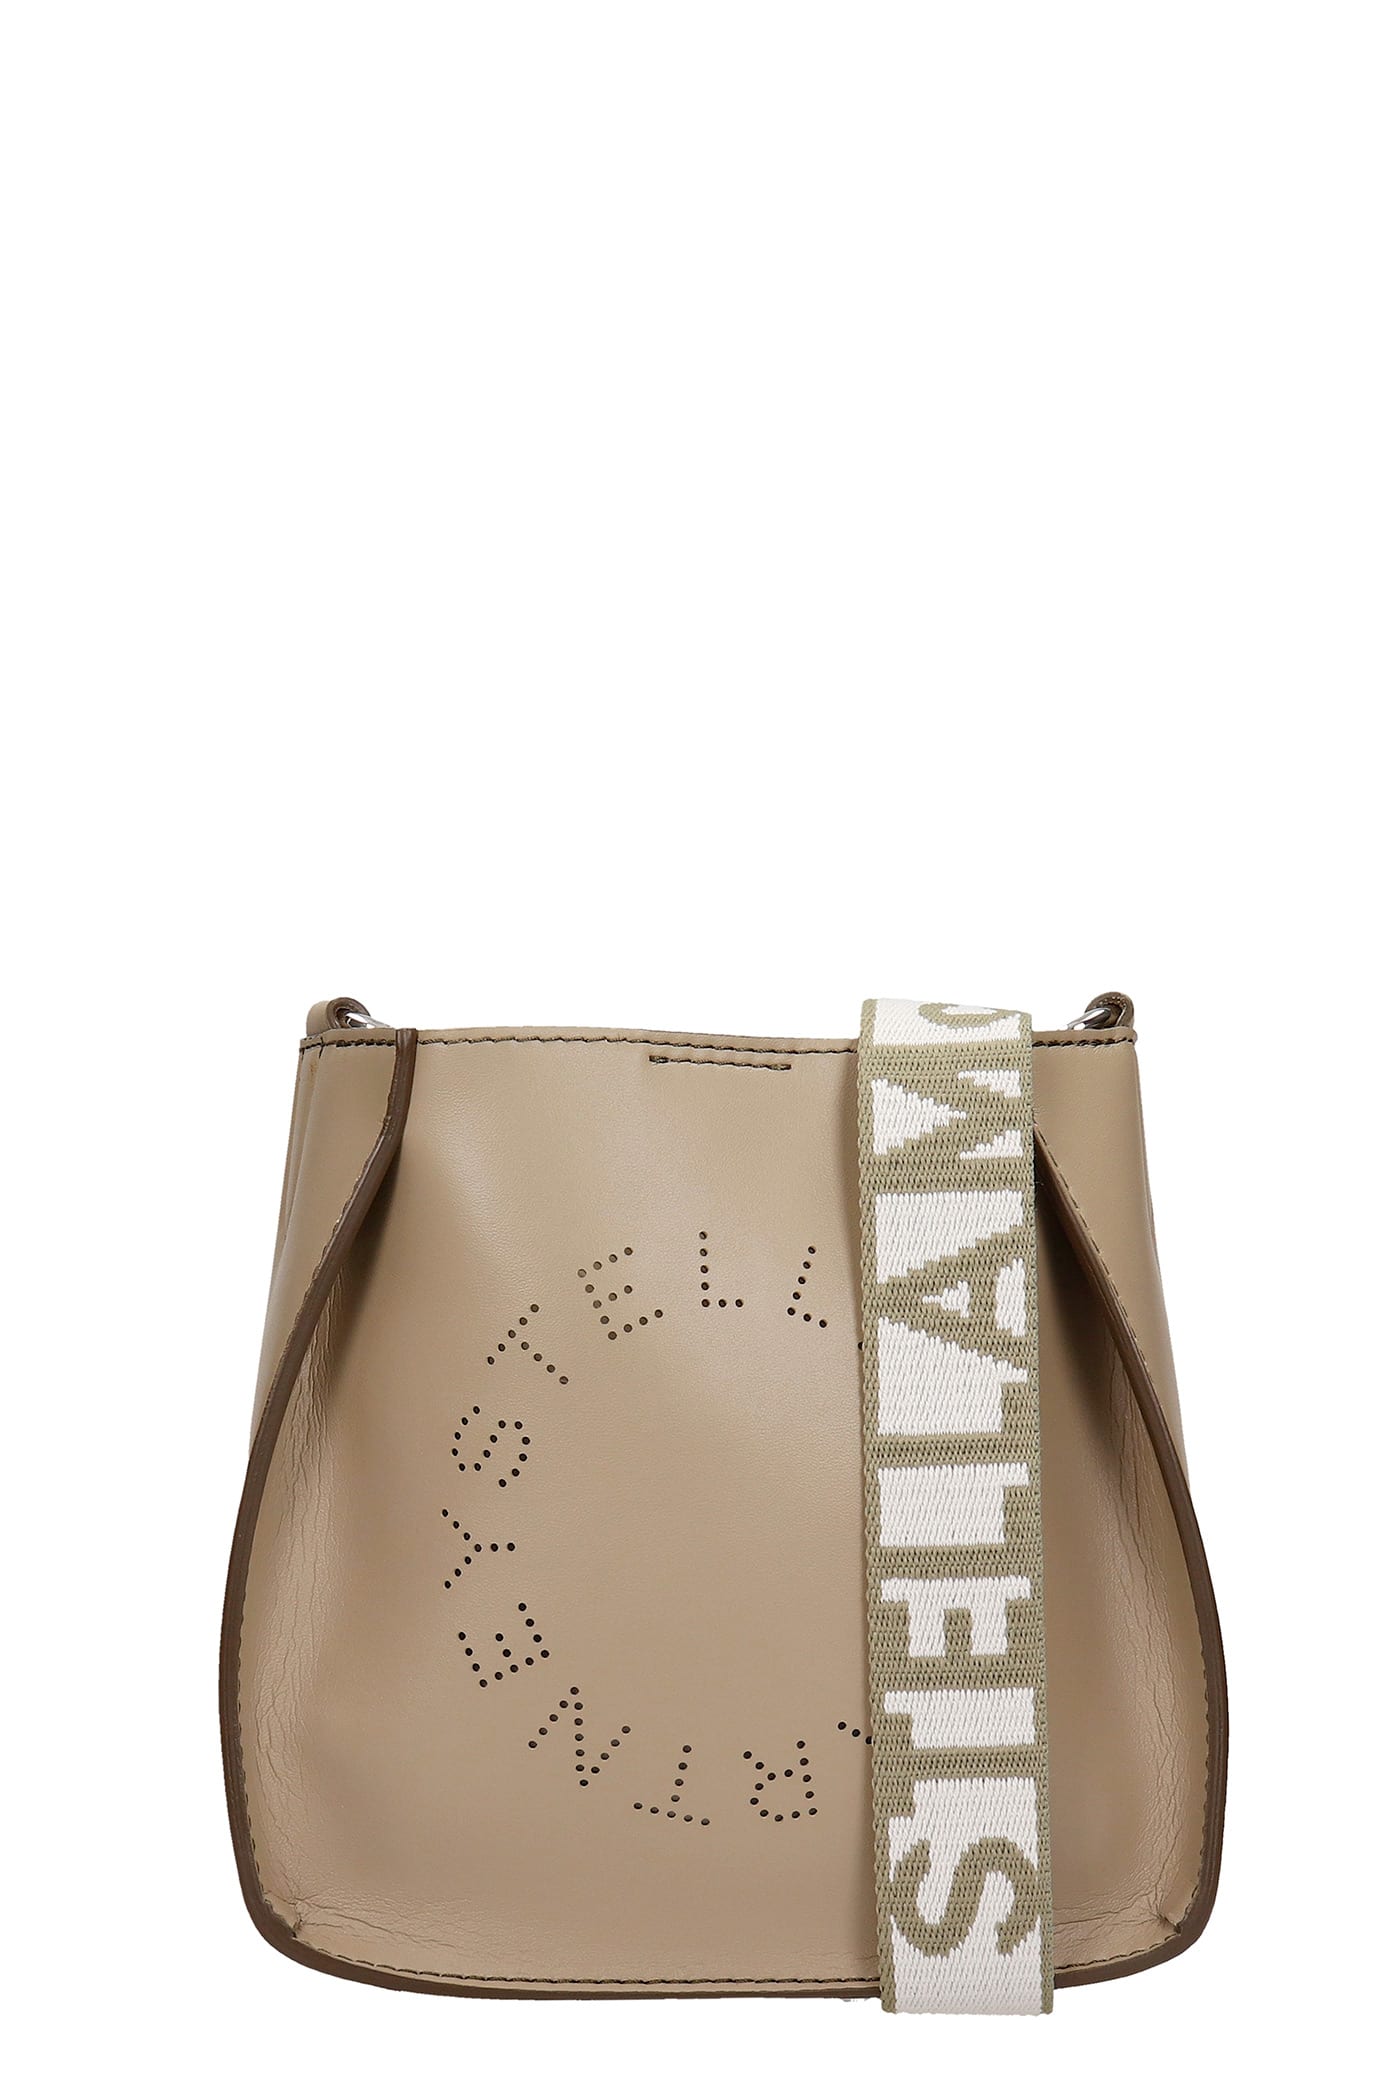 Stella McCartney Shoulder Bag In Taupe Faux Leather